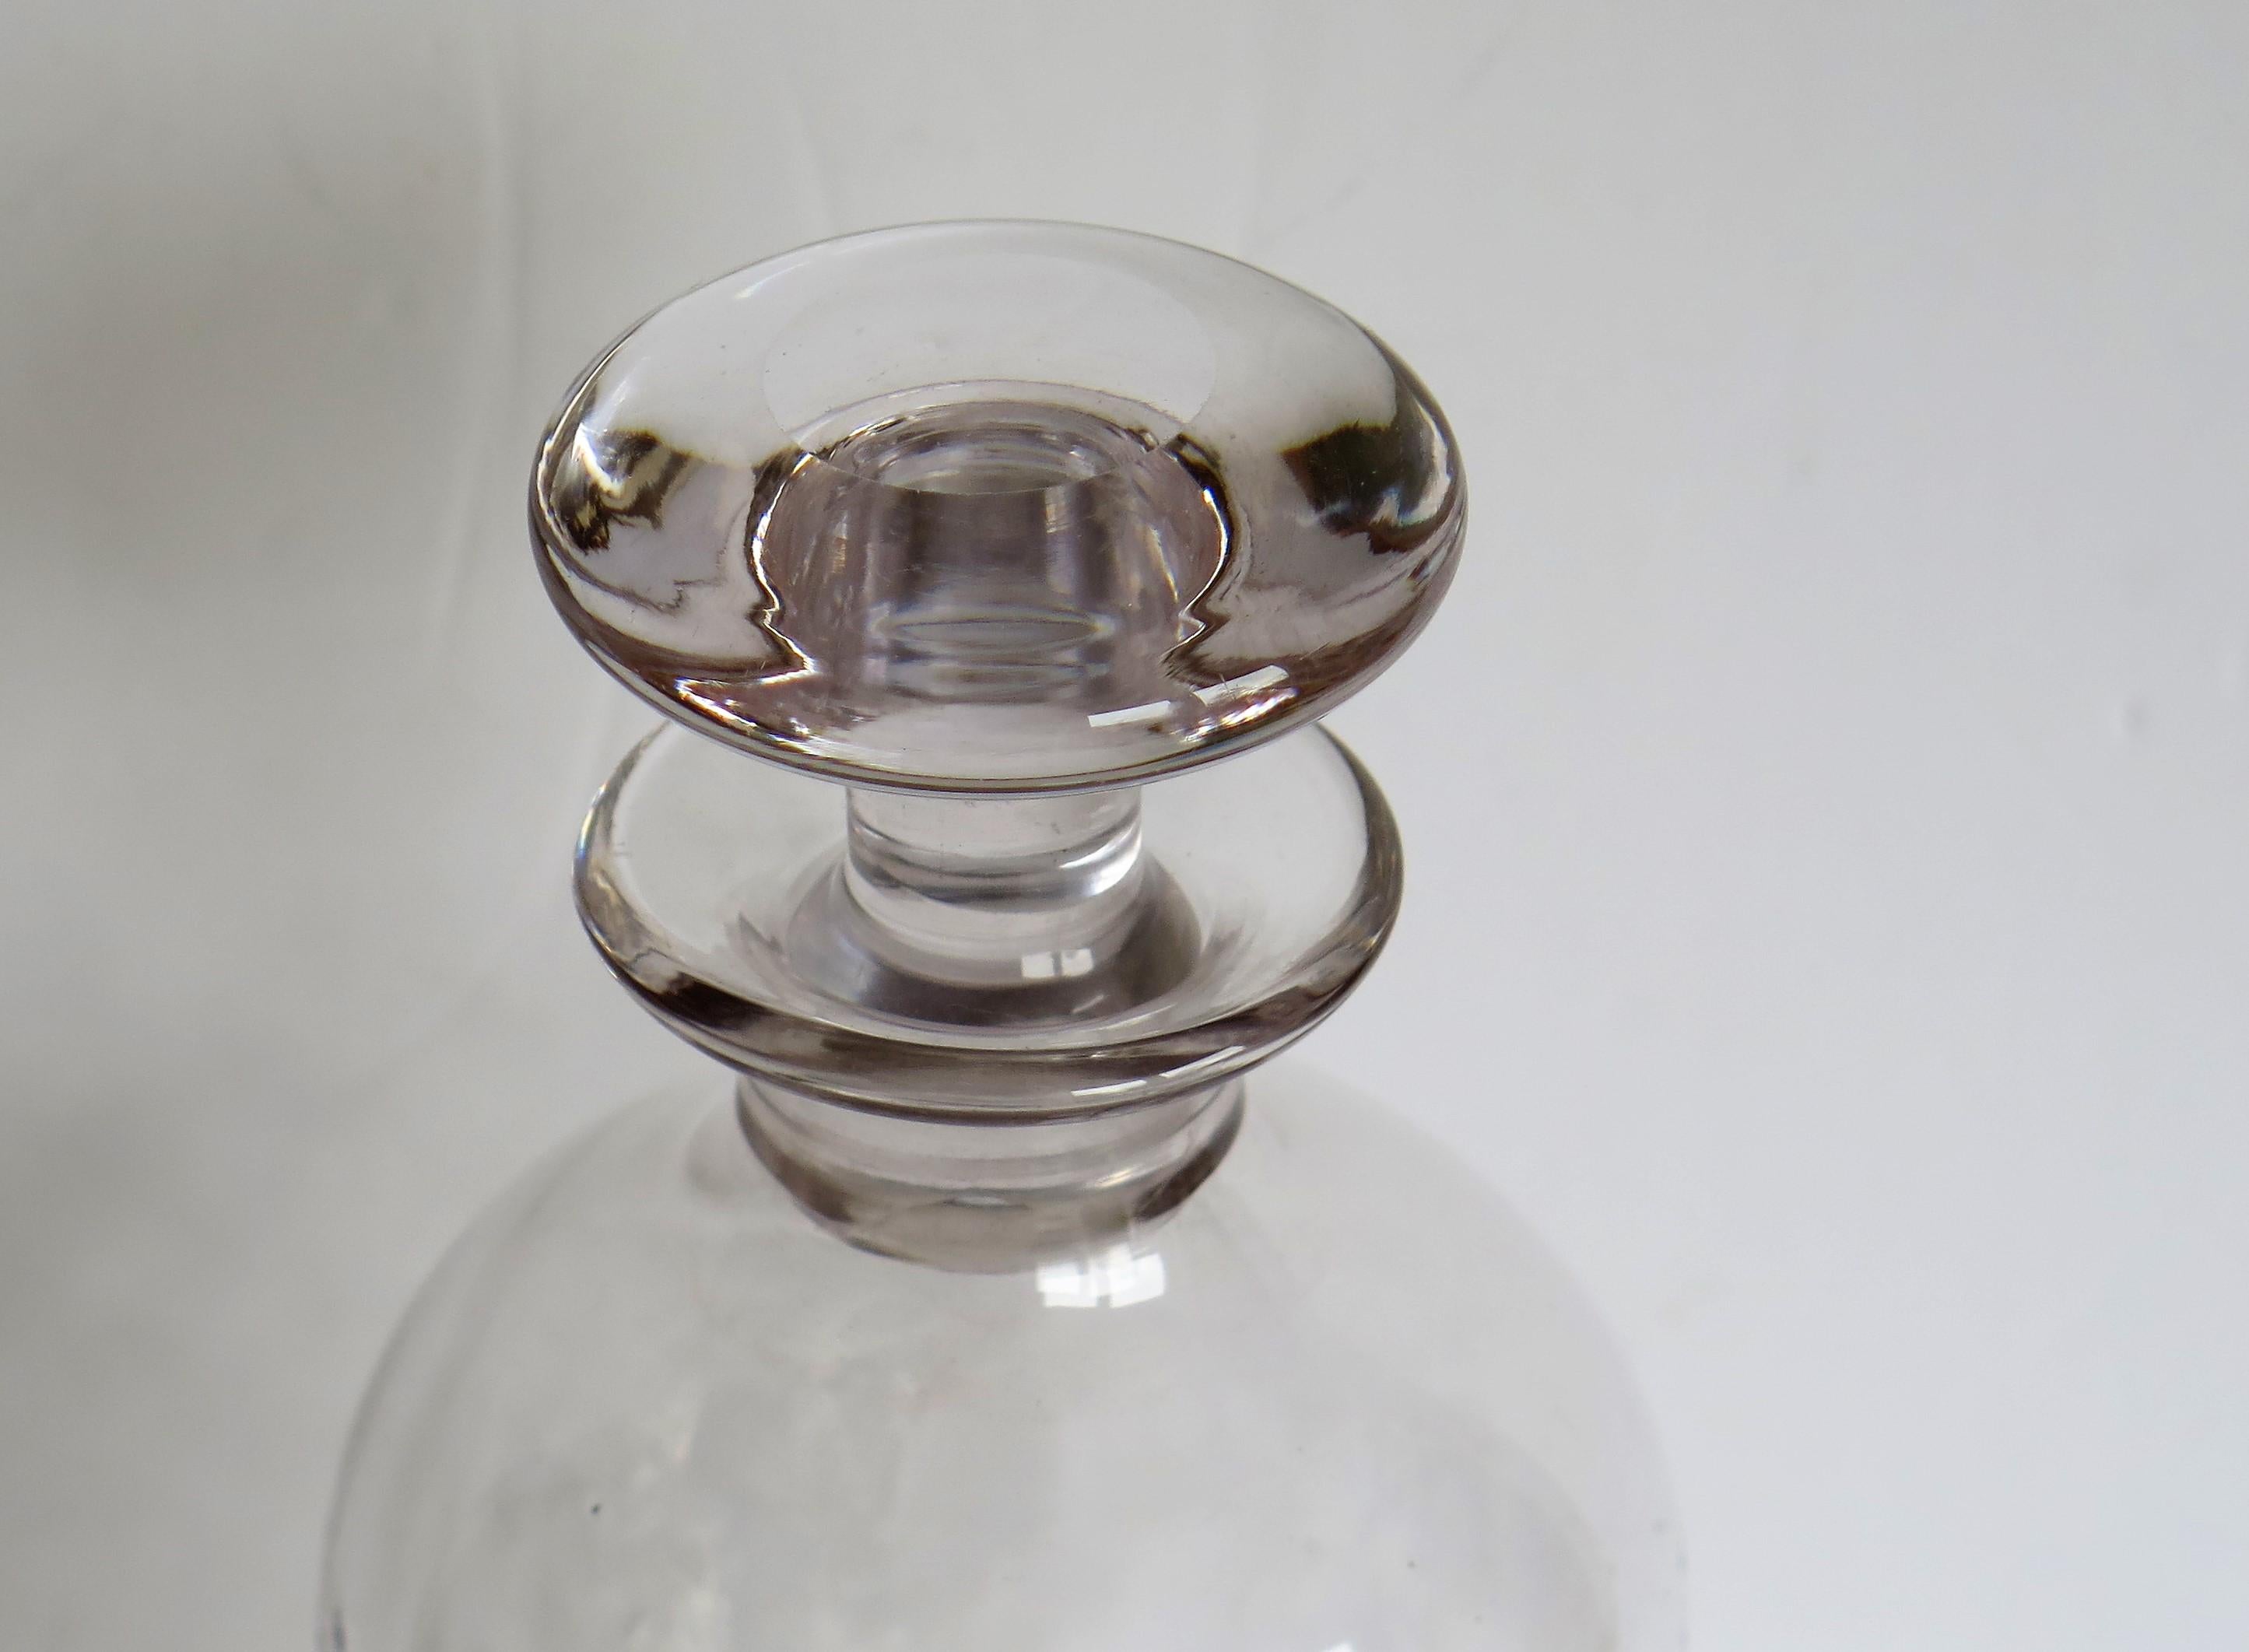 20th Century Edwardian Blown Glass Decanter Dimple Moulded with Mushroom Stopper, circa 1900 For Sale